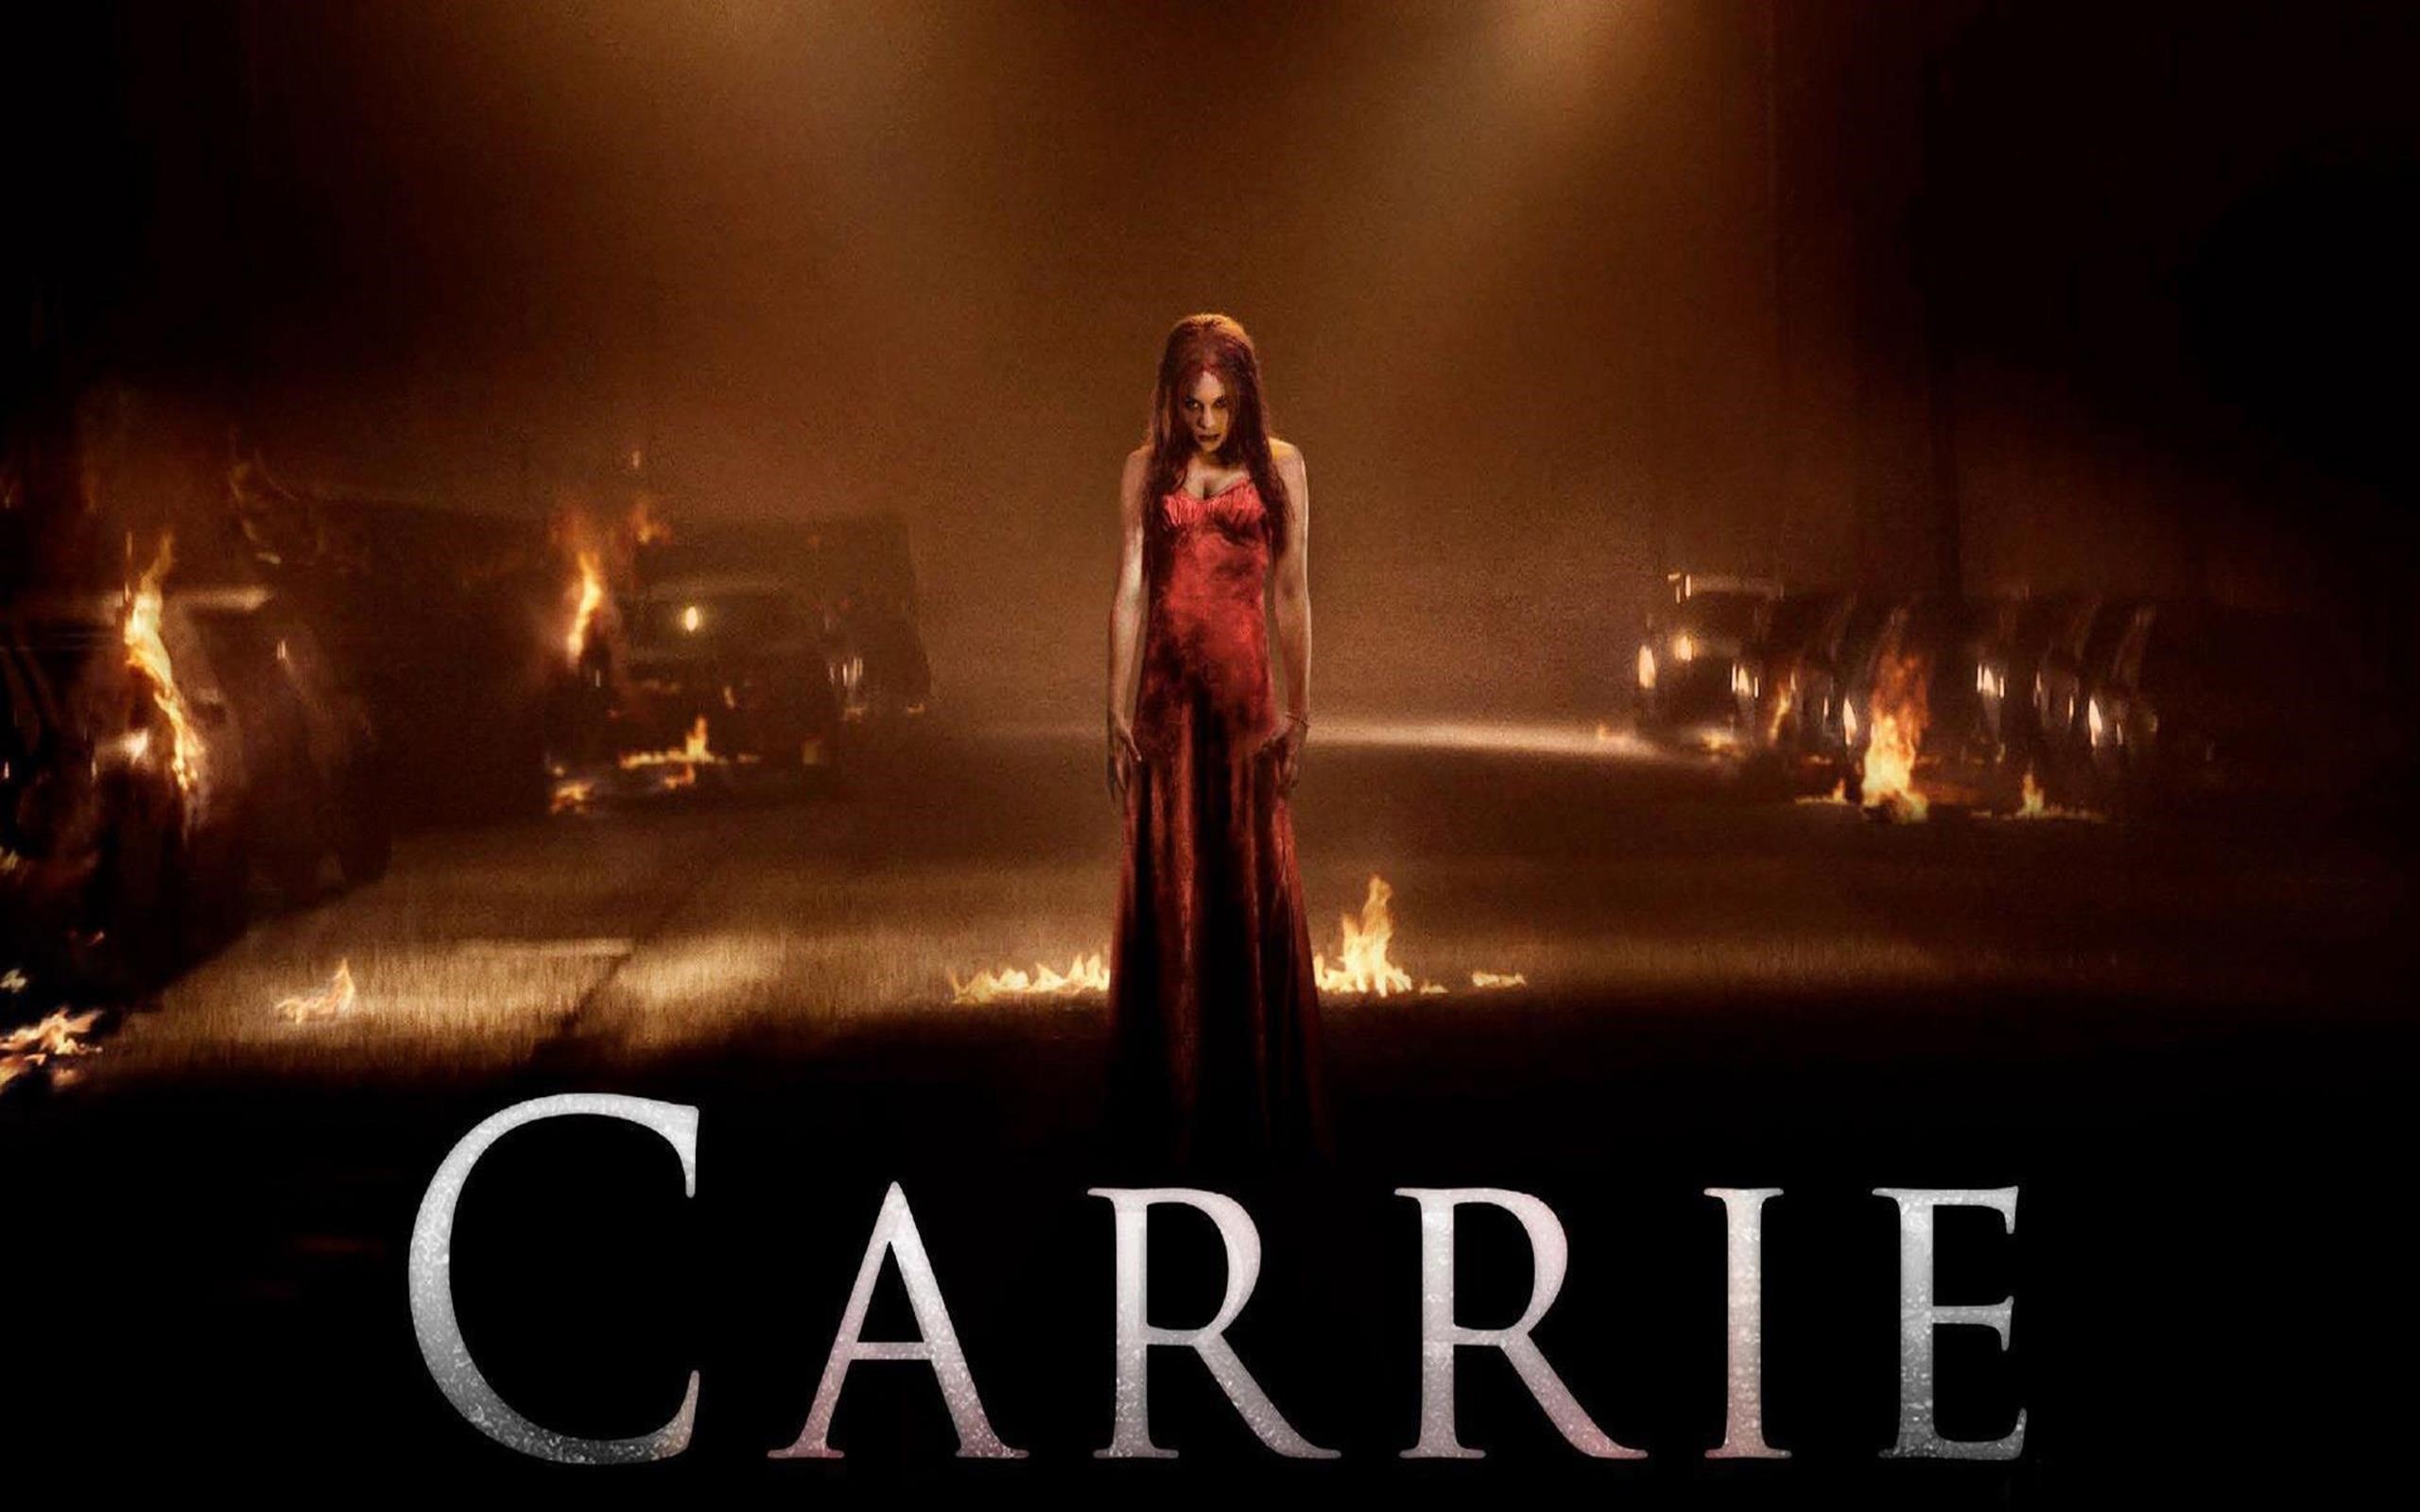 Carrie Upcoming 2014 Hollywood Horror Movie Wallpaper - Carrie 2013 - HD Wallpaper 